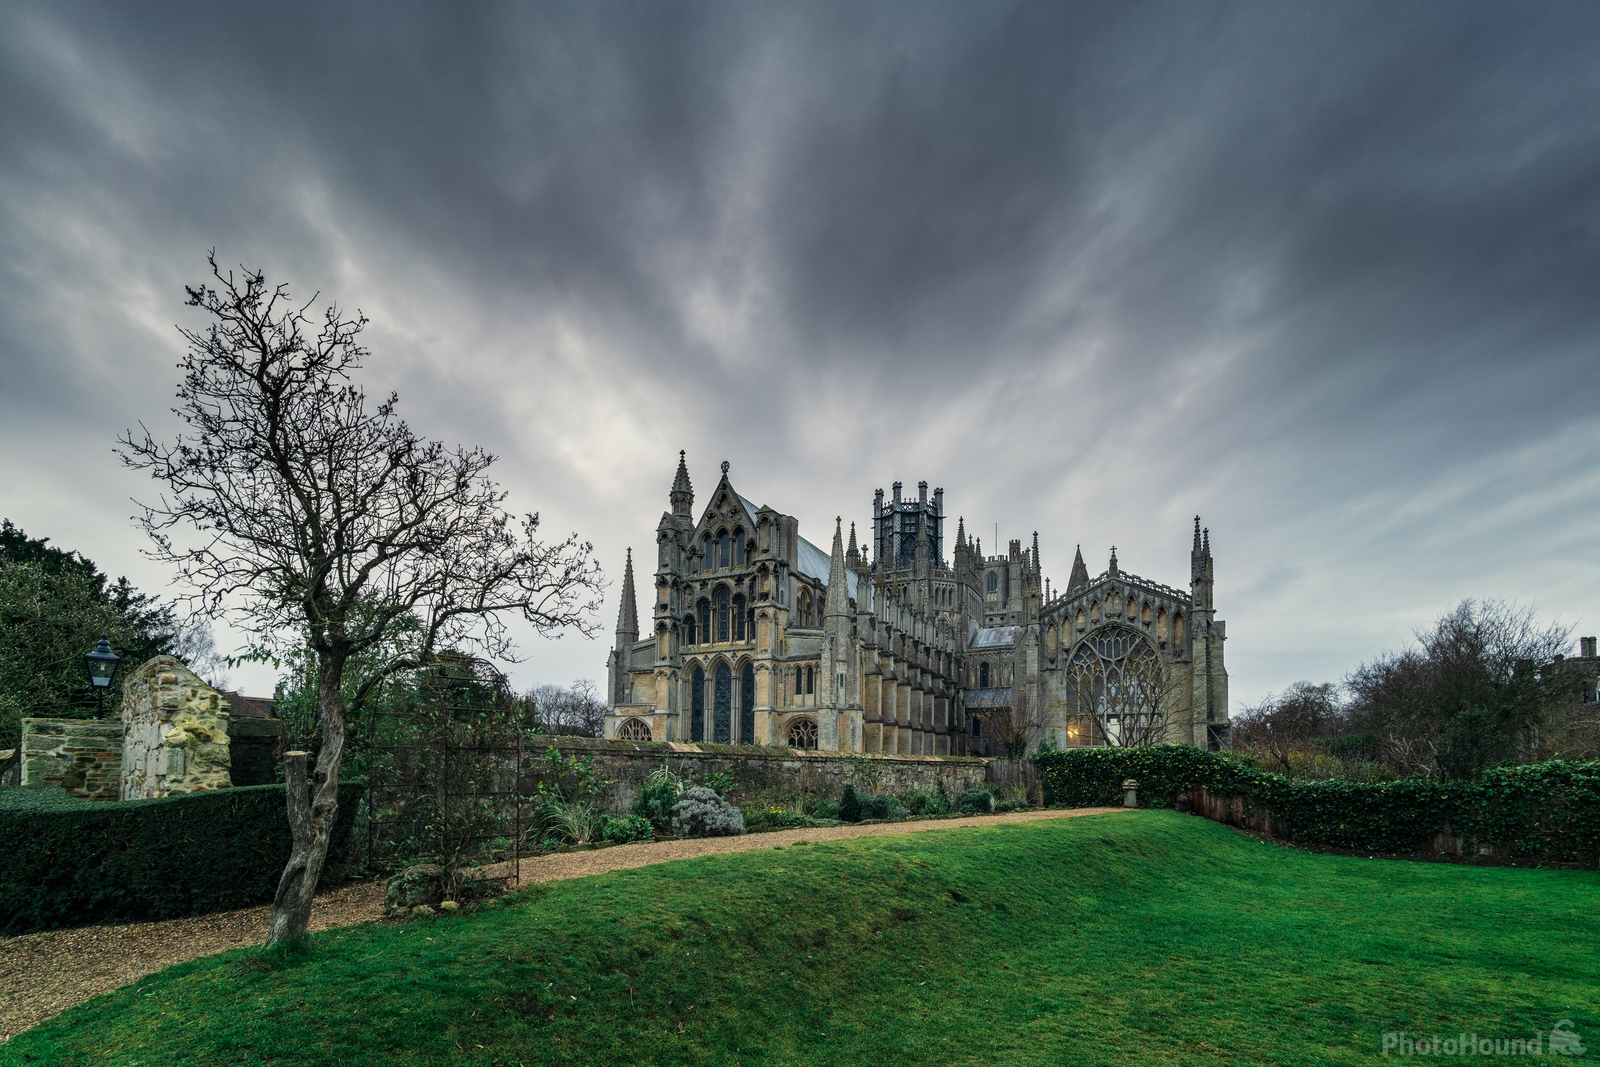 Image of Ely Cathedral - East Lawn by James Billings.